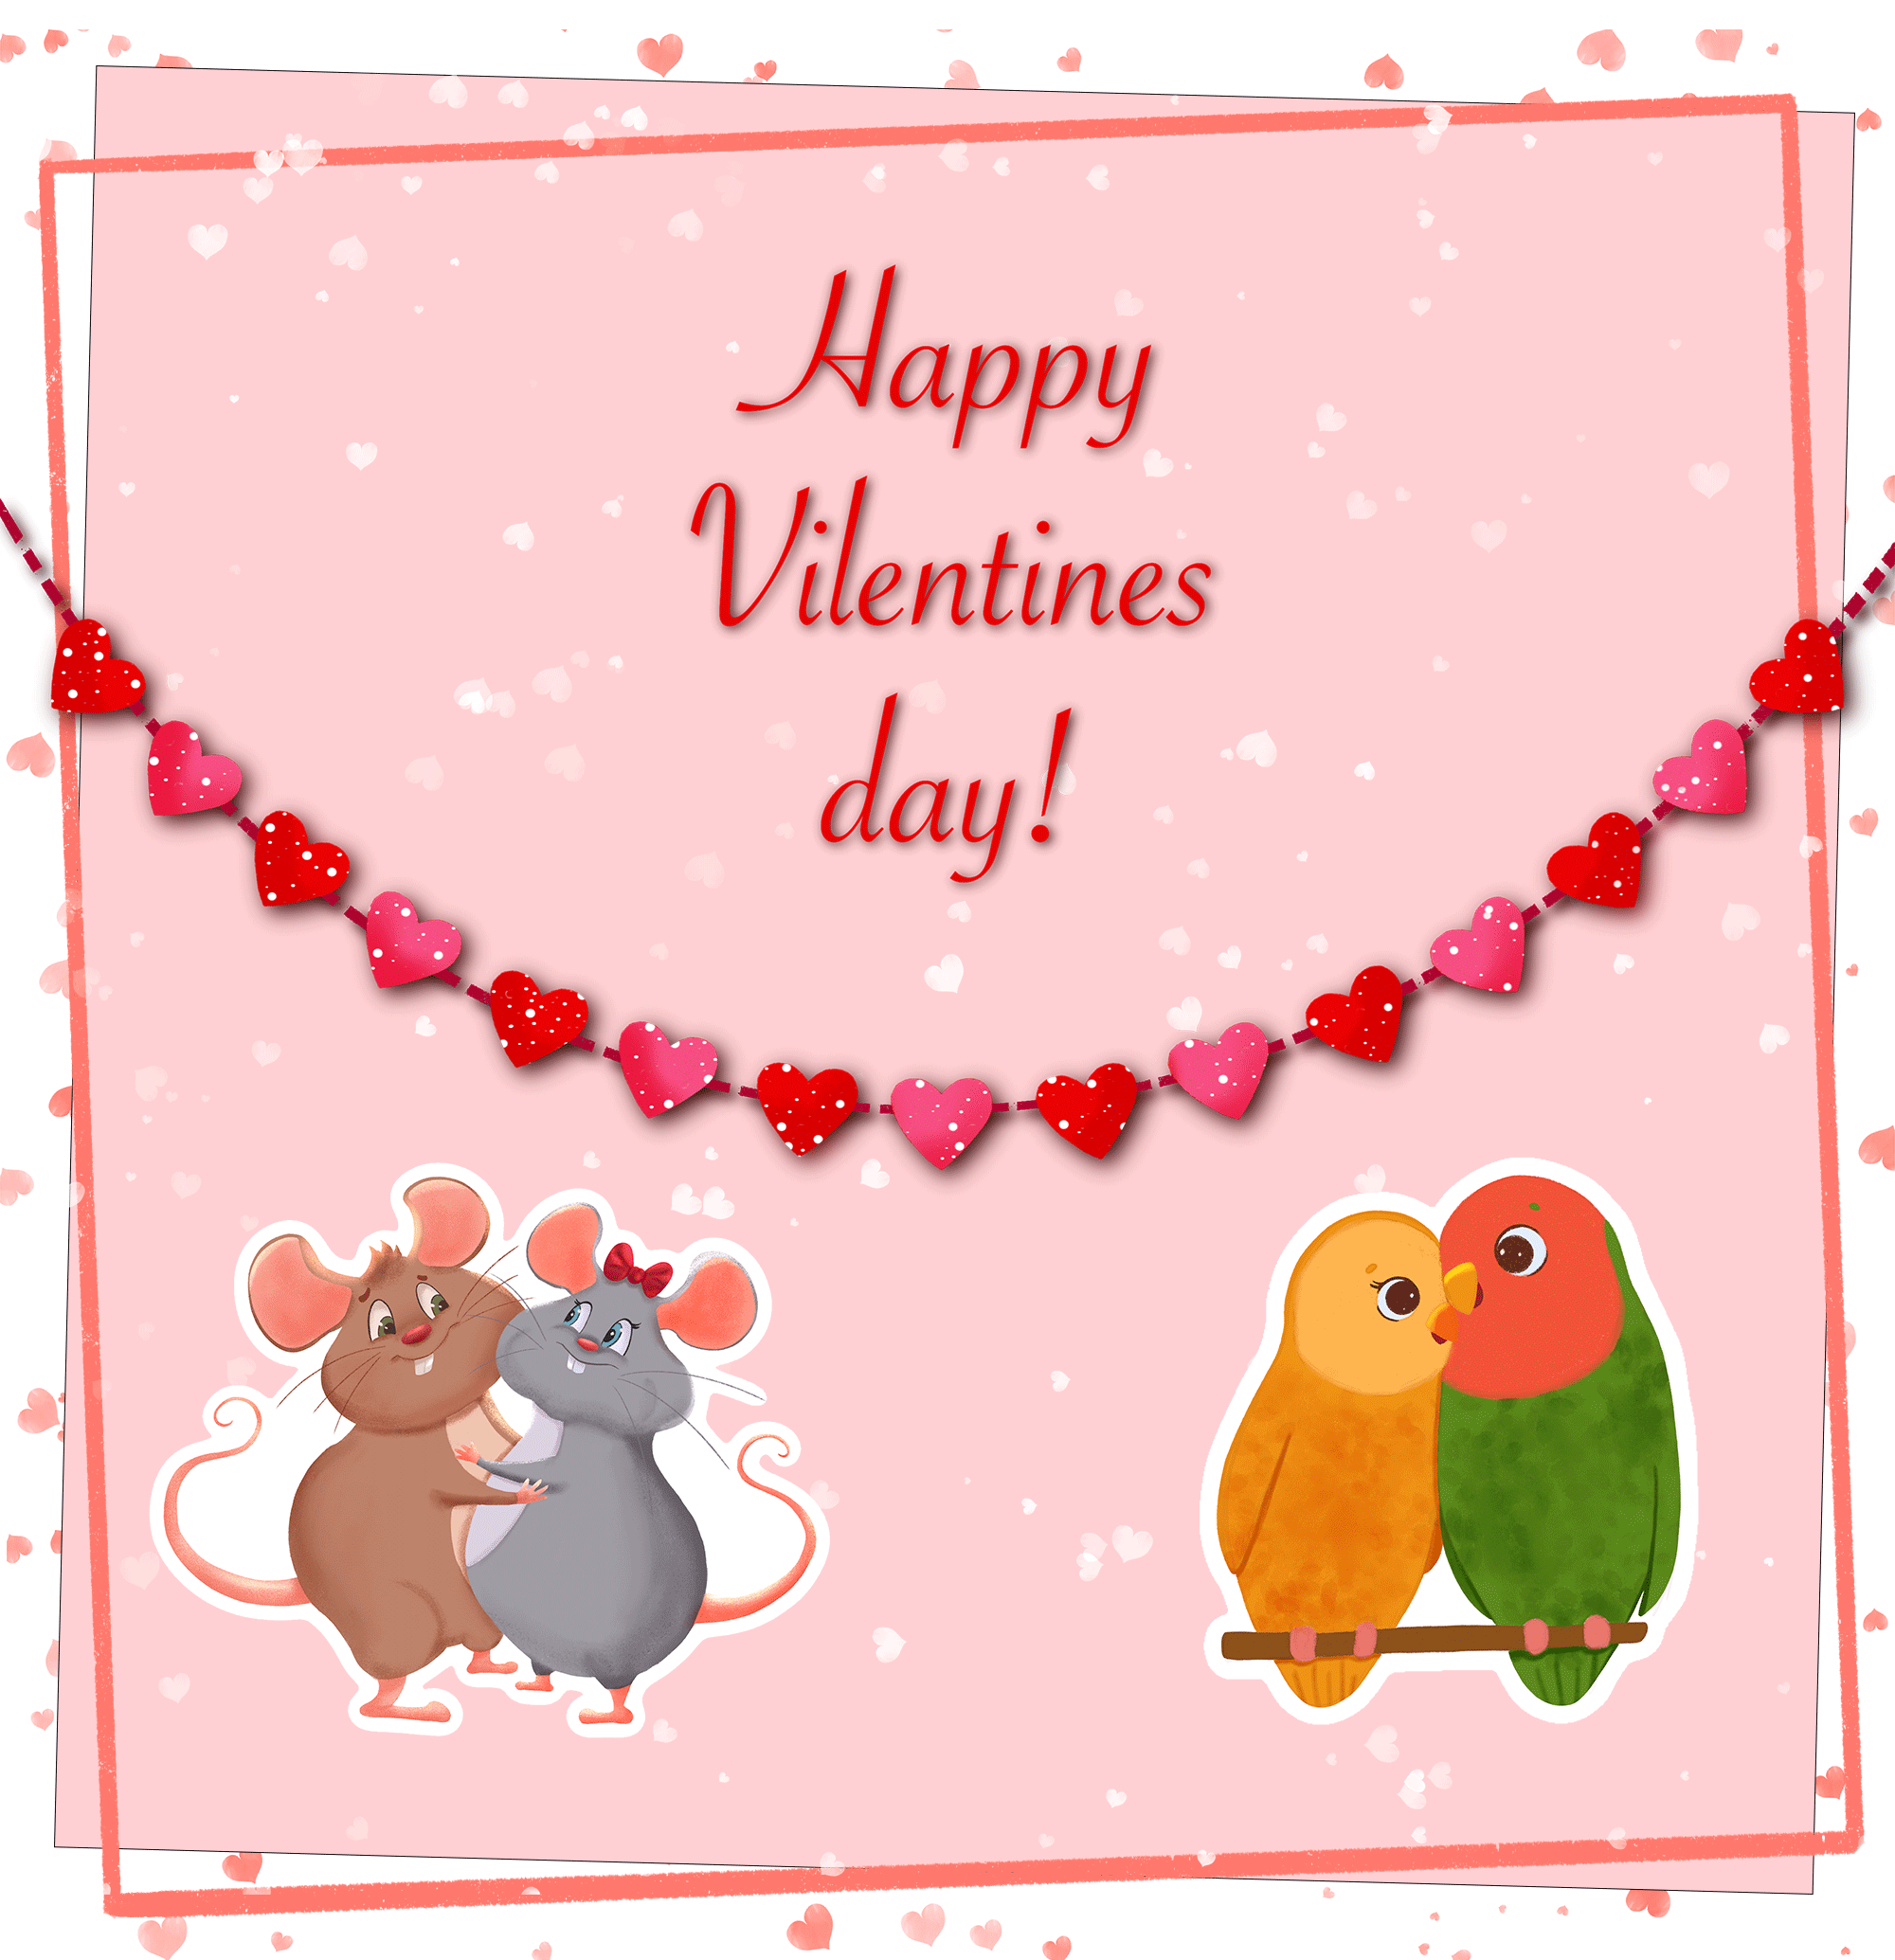 Cute stickers for Happy Valentines Day book illustration character design children illustration cute stickers illustration stickers stickers illustrations цифровая иллюстрация